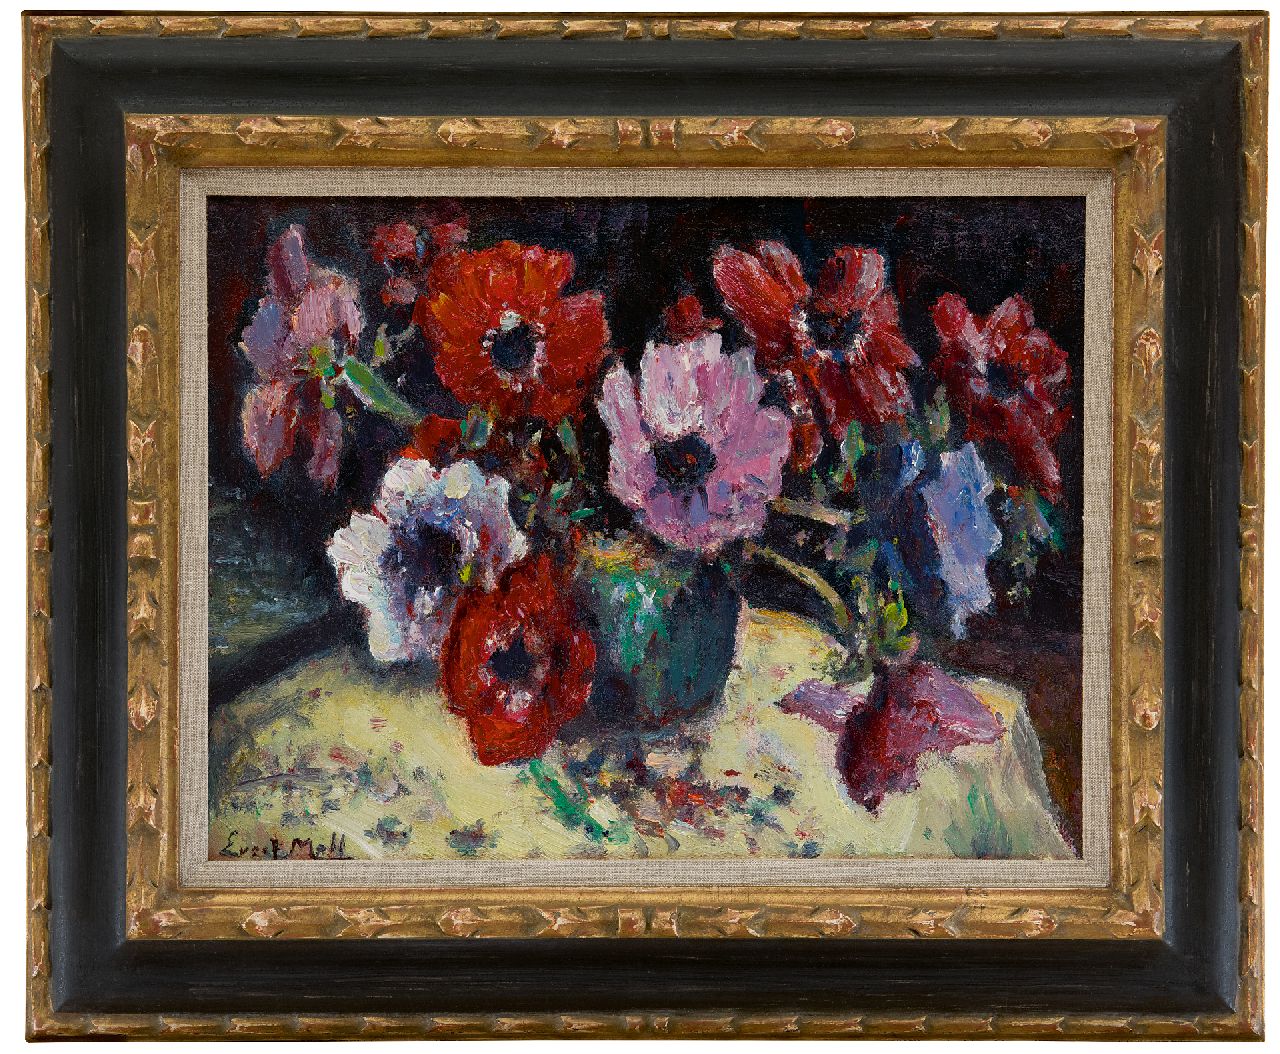 Moll E.  | Evert Moll | Paintings offered for sale | Anemones, oil on canvas 30.5 x 40.1 cm, signed l.l.